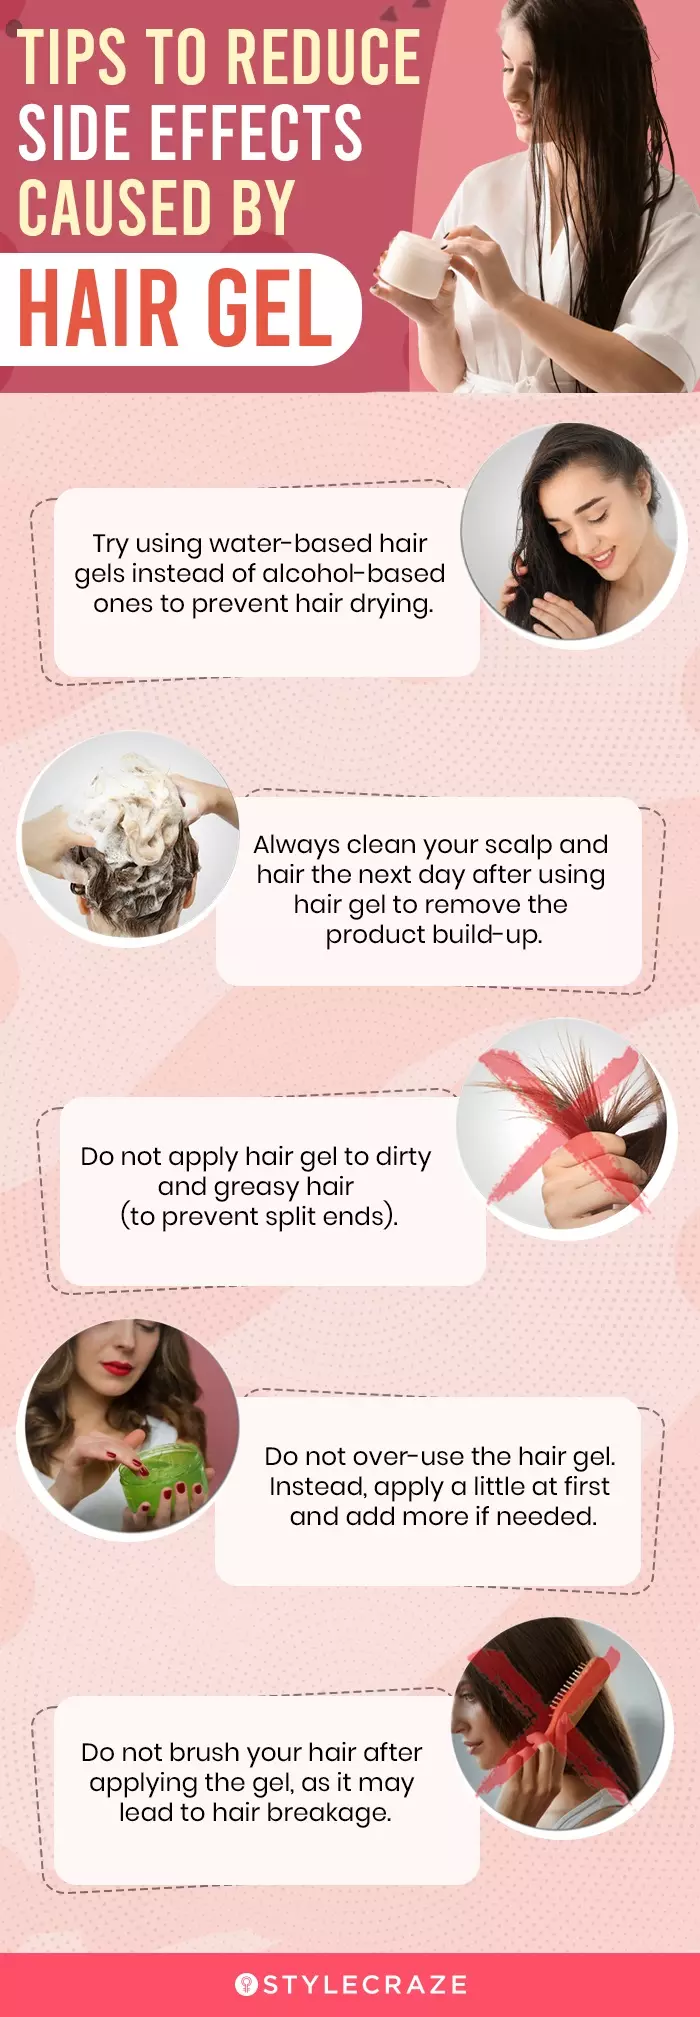 tips to reduce side effects caused by hair gel (infographic)